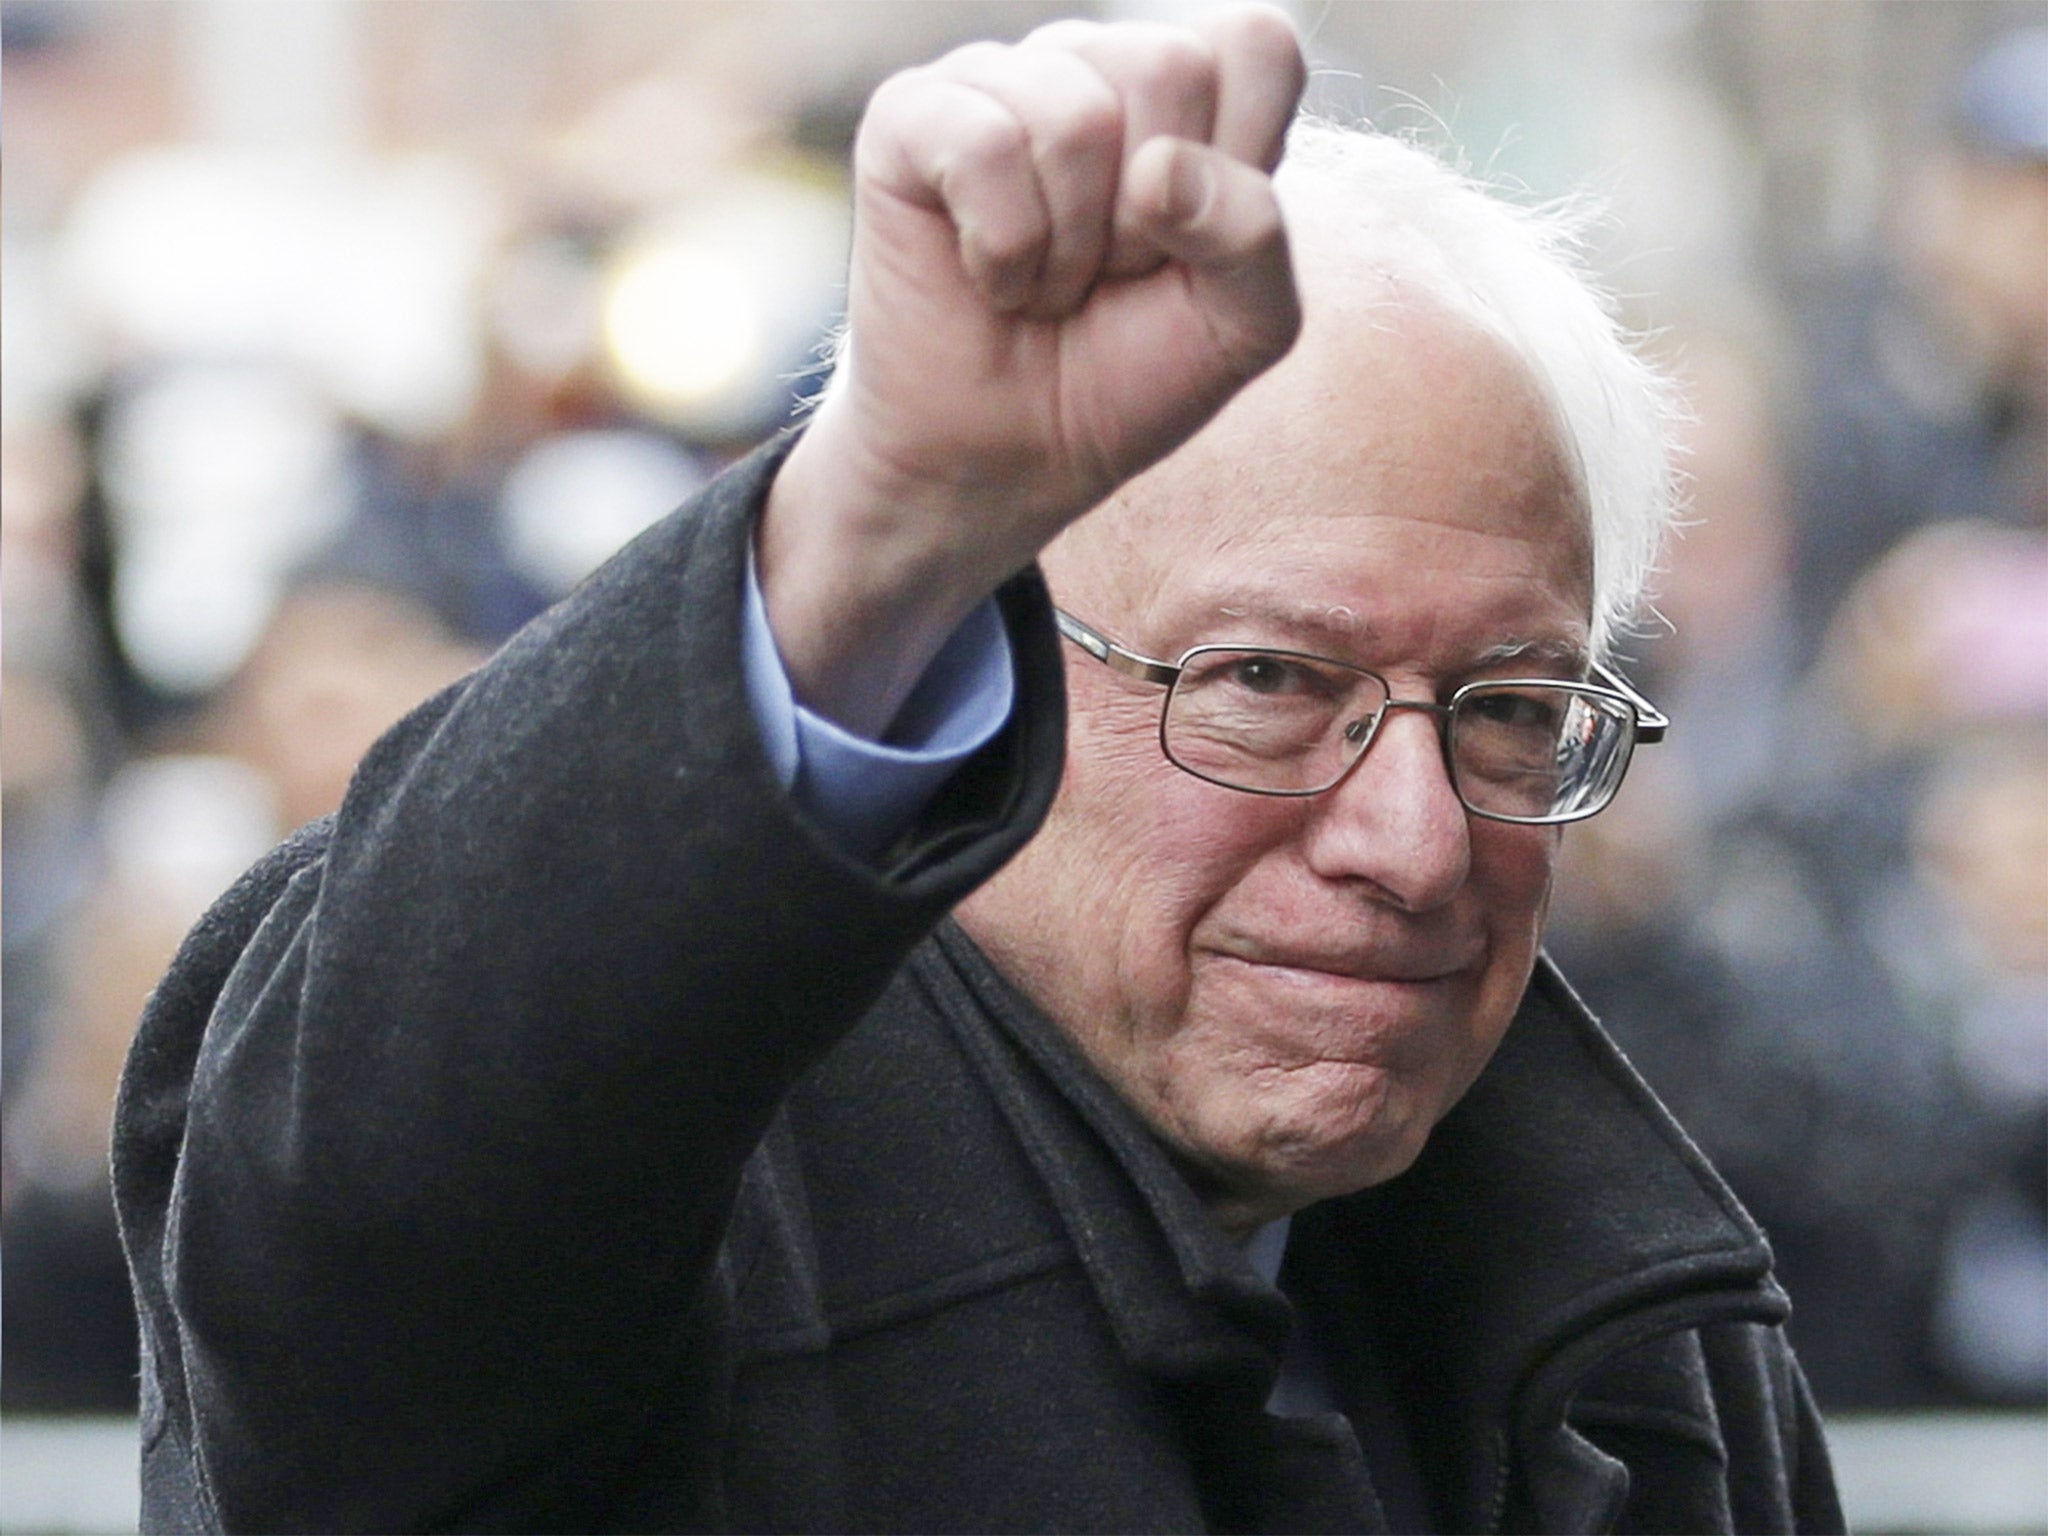 Bernie Sanders only raised less than $5,000 from lobbyists in the most recent election cycle